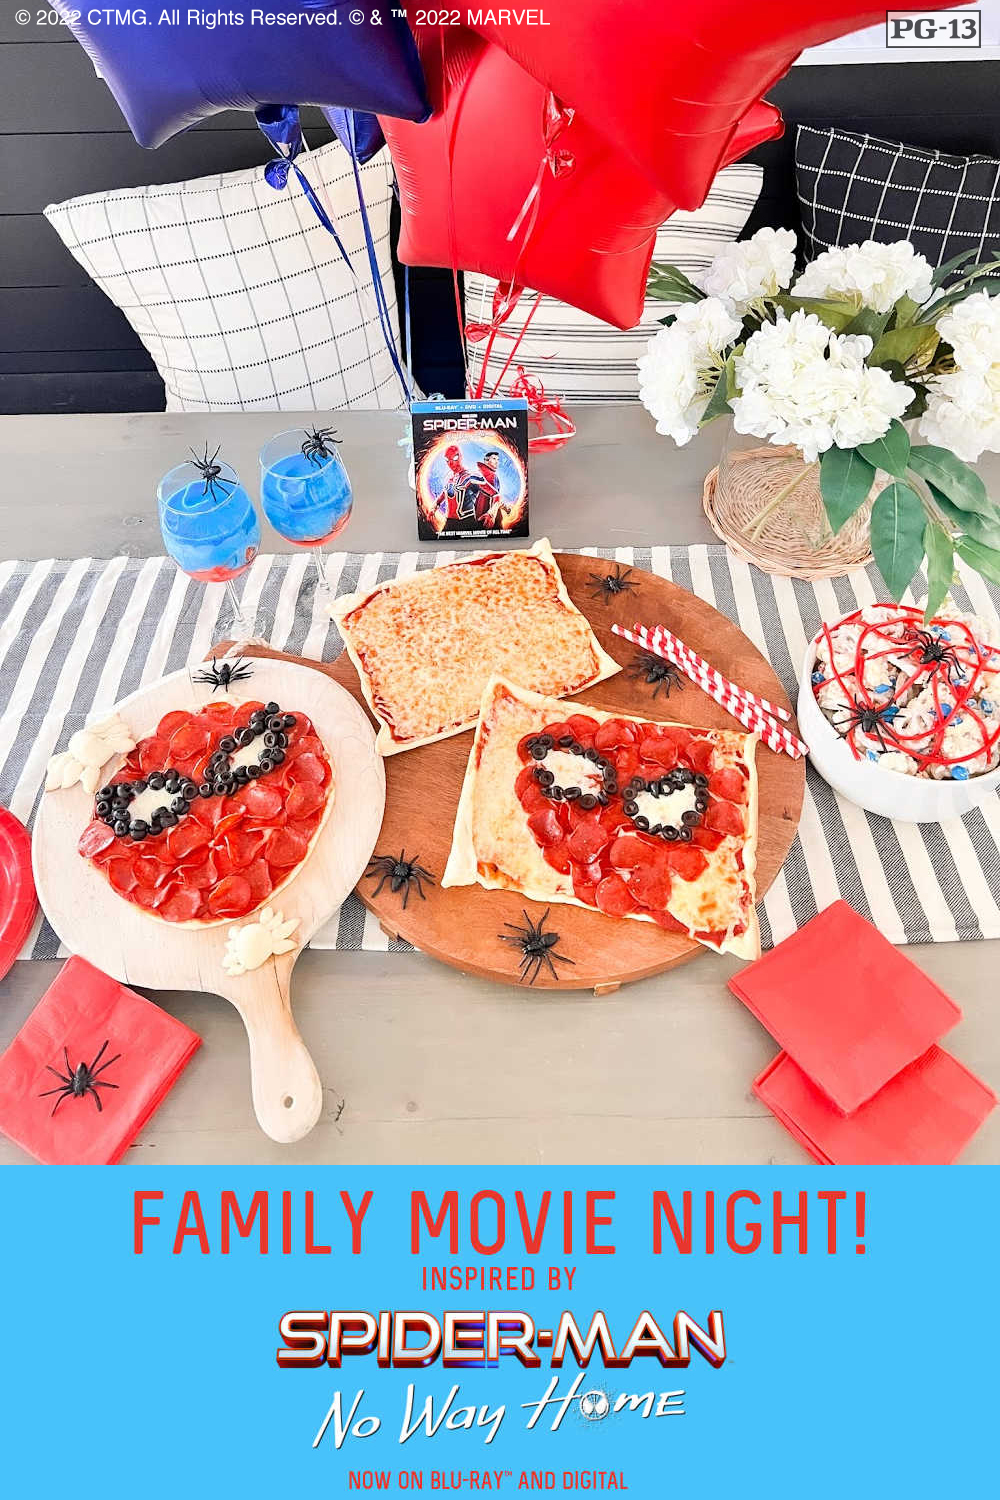 Family Movie Night with Spider-Man: No Way Home! Watch the new Spider-Man: No Way Home movie with Spider-Man themed frozen drinks, Spidey mask pizzas and spider web snack mix! 